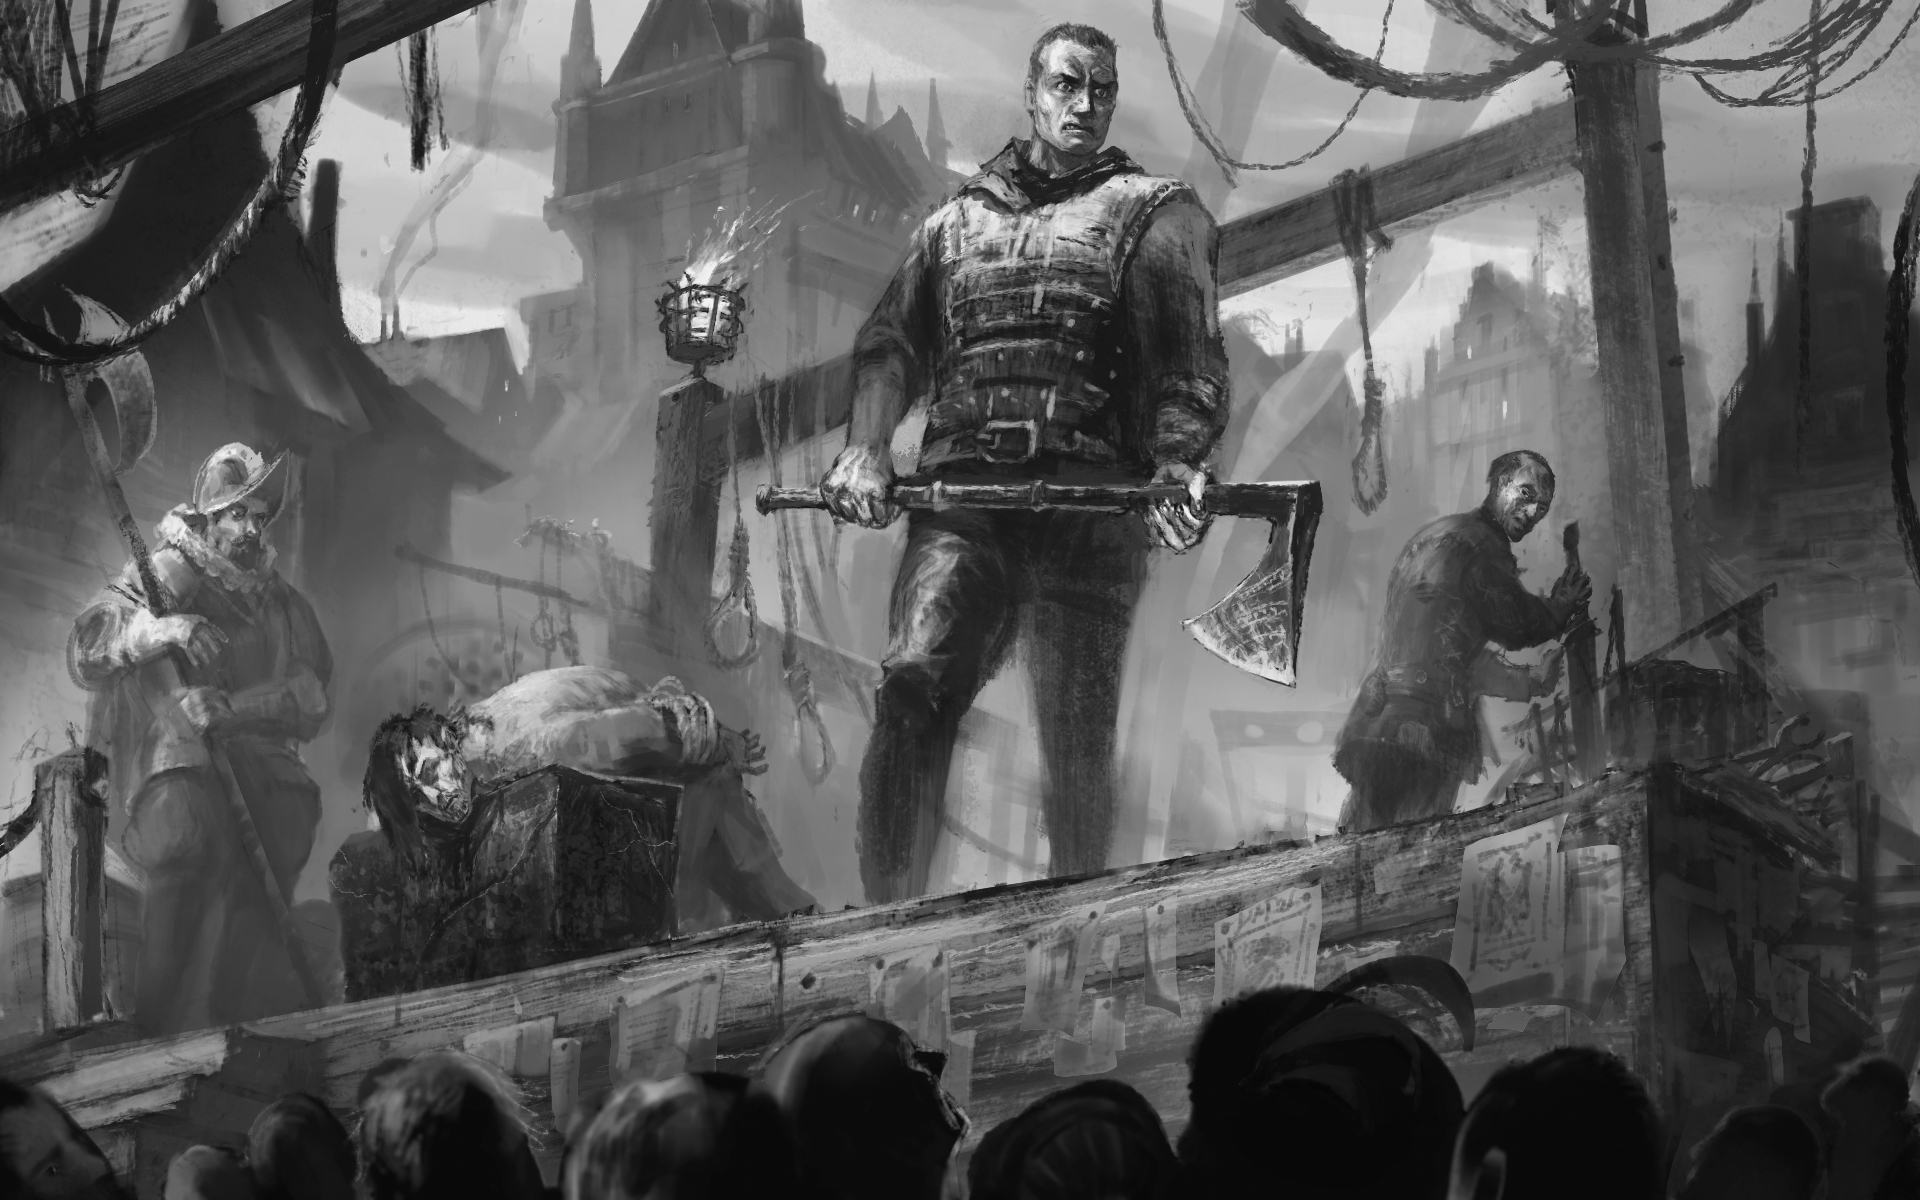 Win a copy of Harrowing RPG The Executioner